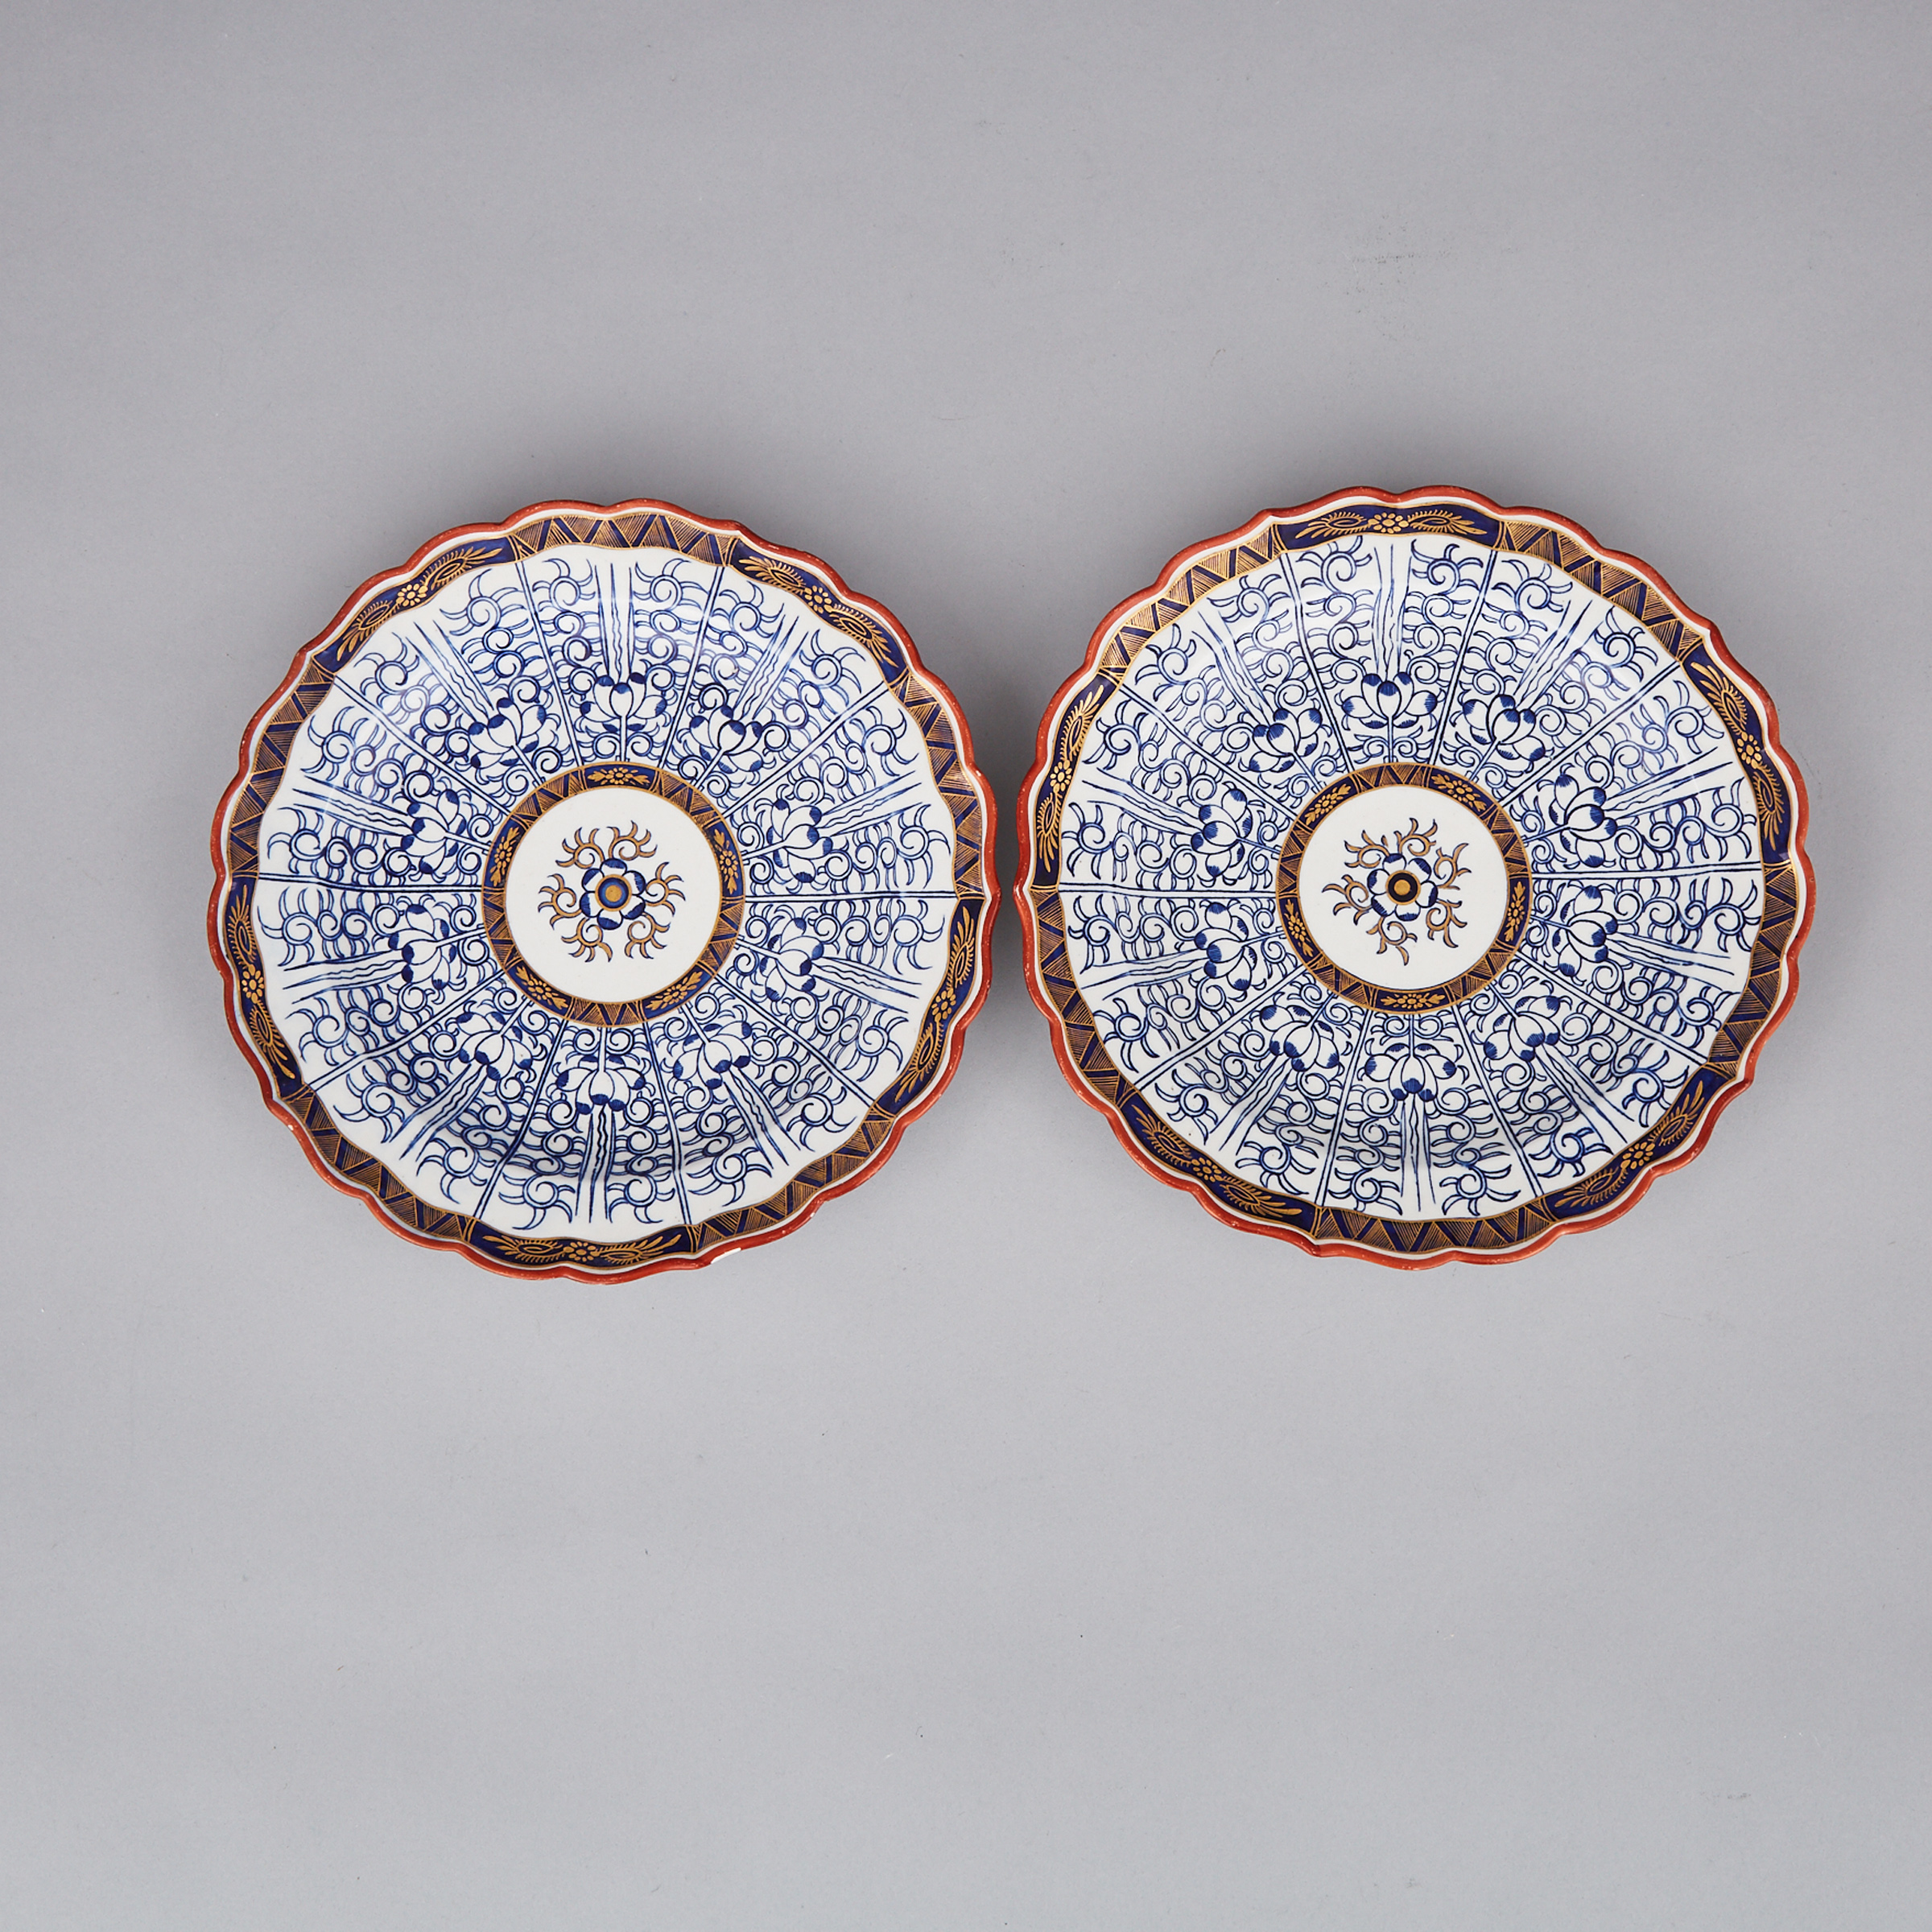 Pair of Worcester ‘Royal Lily’ Plates, c.1785